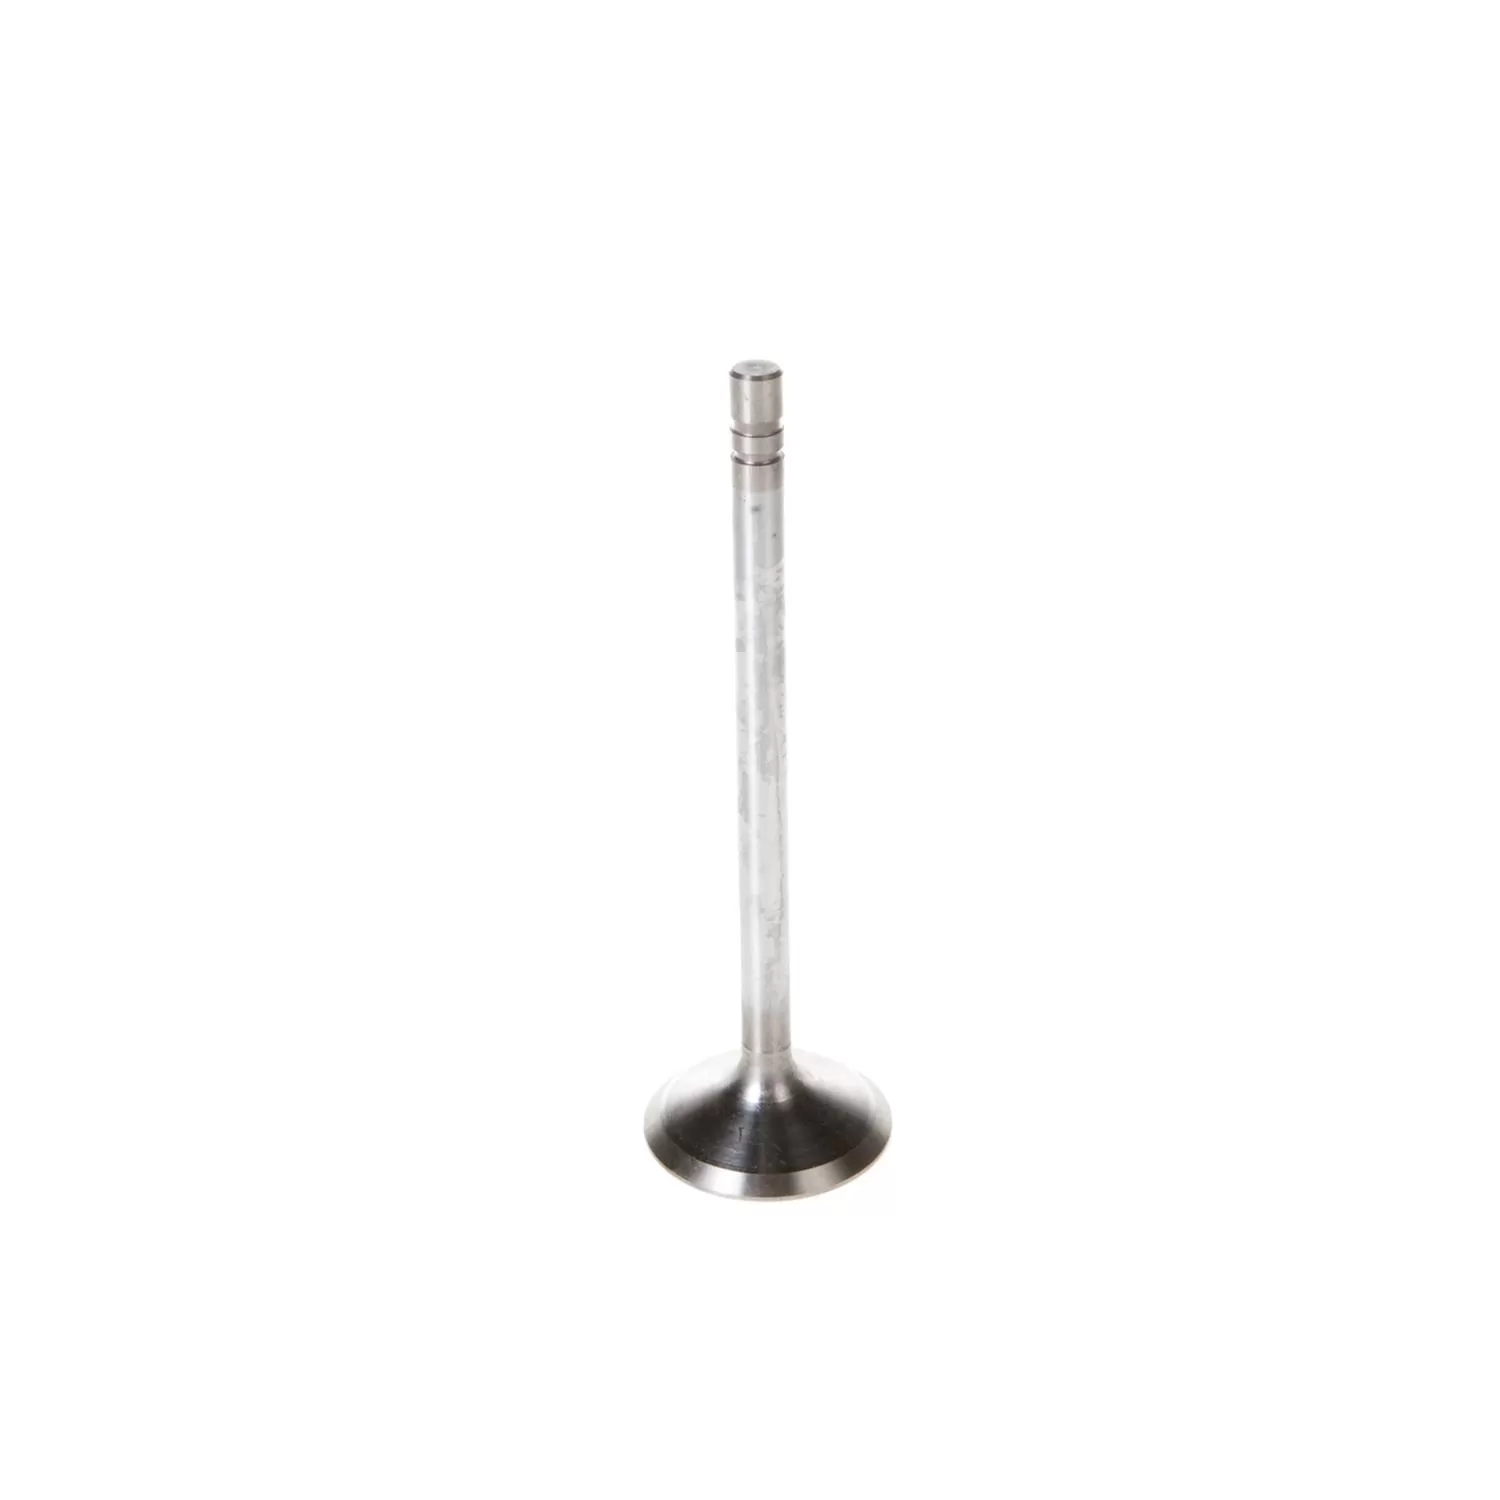 Melling Stock Replacement Intake Valve - V1336